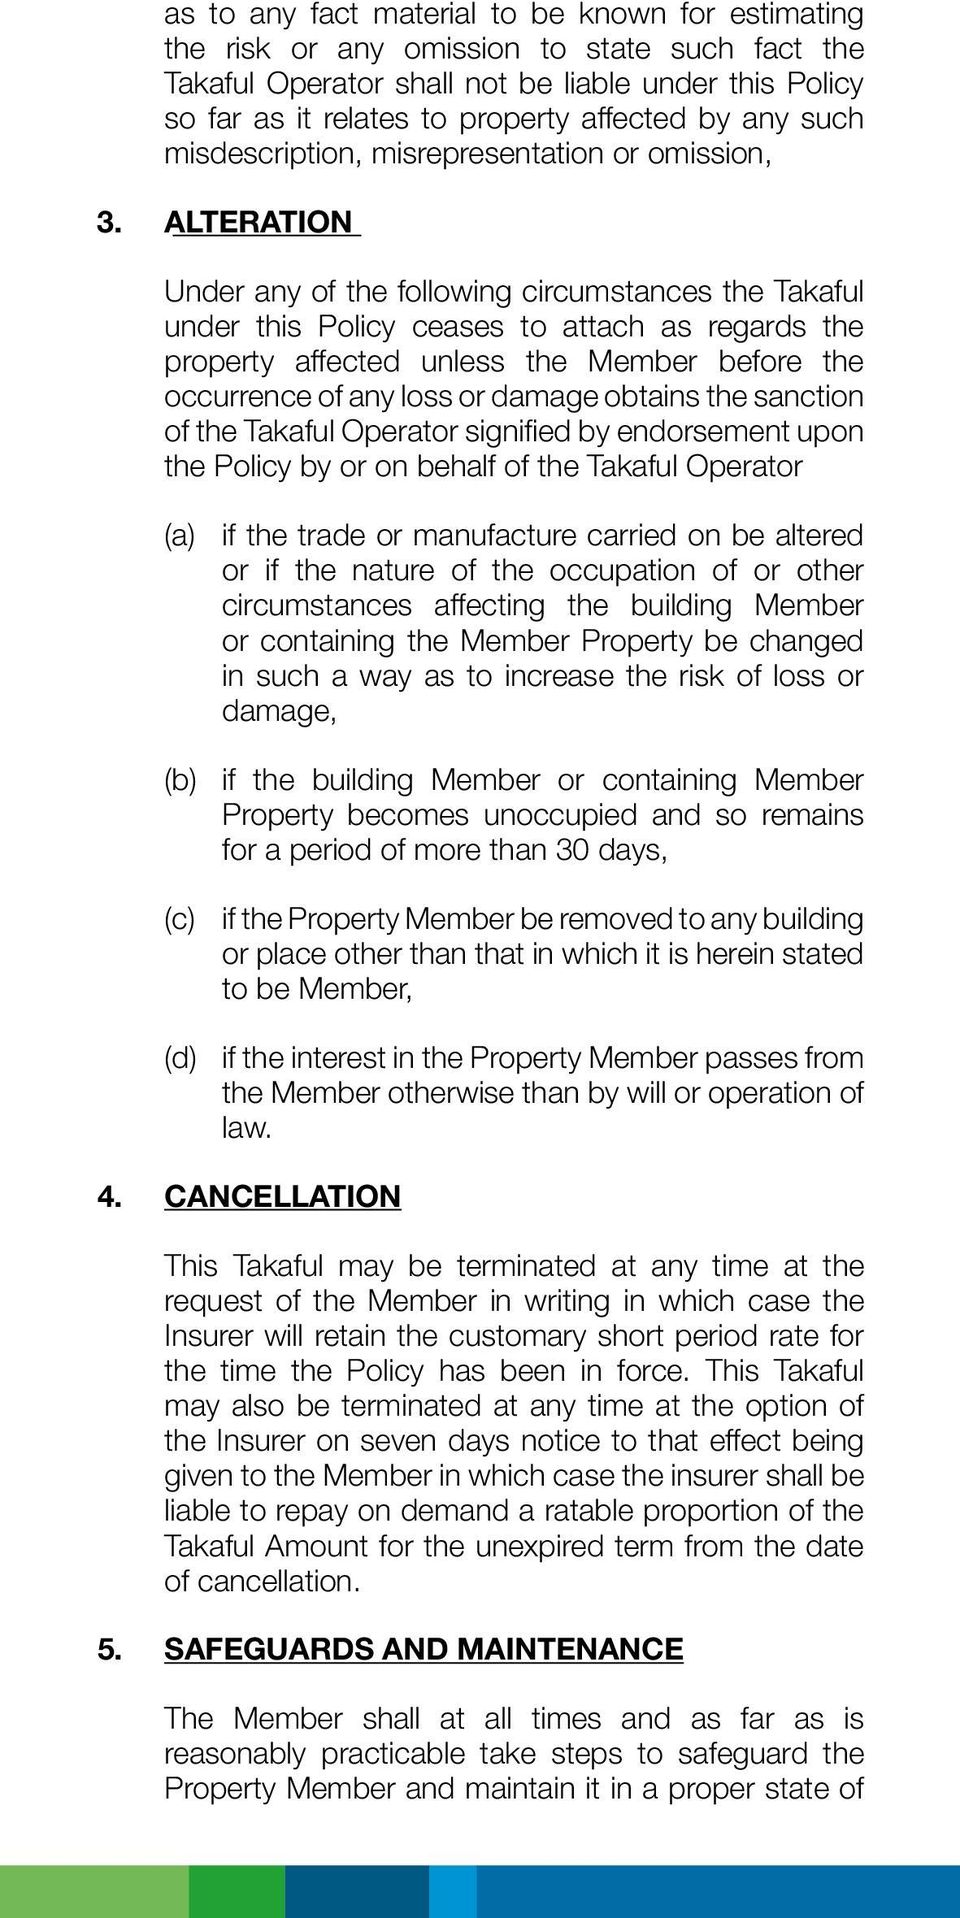 ALTERATION Under any of the following circumstances the Takaful under this Policy ceases to attach as regards the property affected unless the Member before the occurrence of any loss or damage